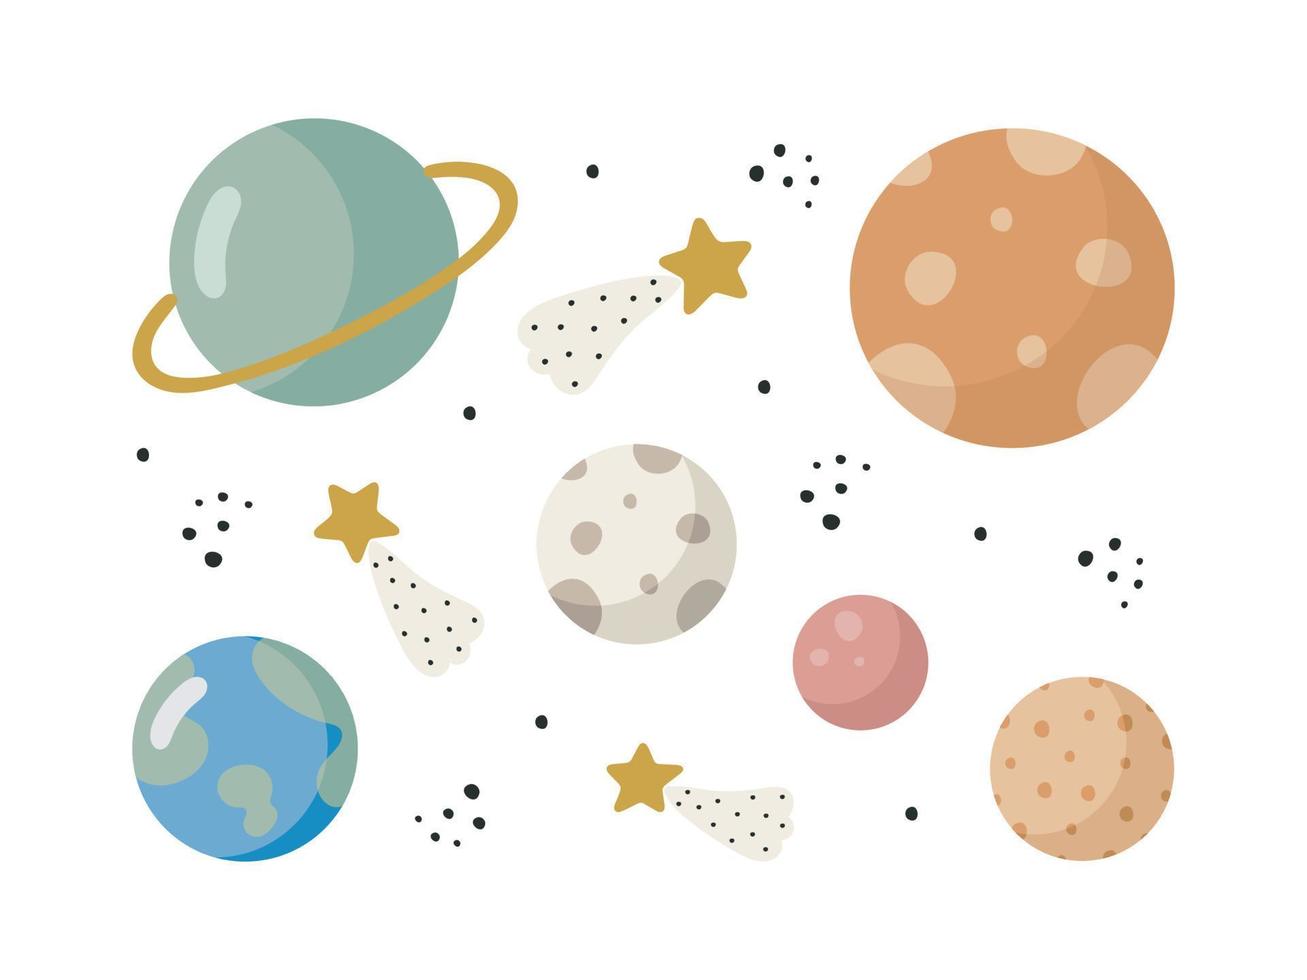 Space set. Vector illustration in cartoon style. Planets, stars. For kids stuff, card, posters, banners, children books and print for clothes, t shirt, icons.